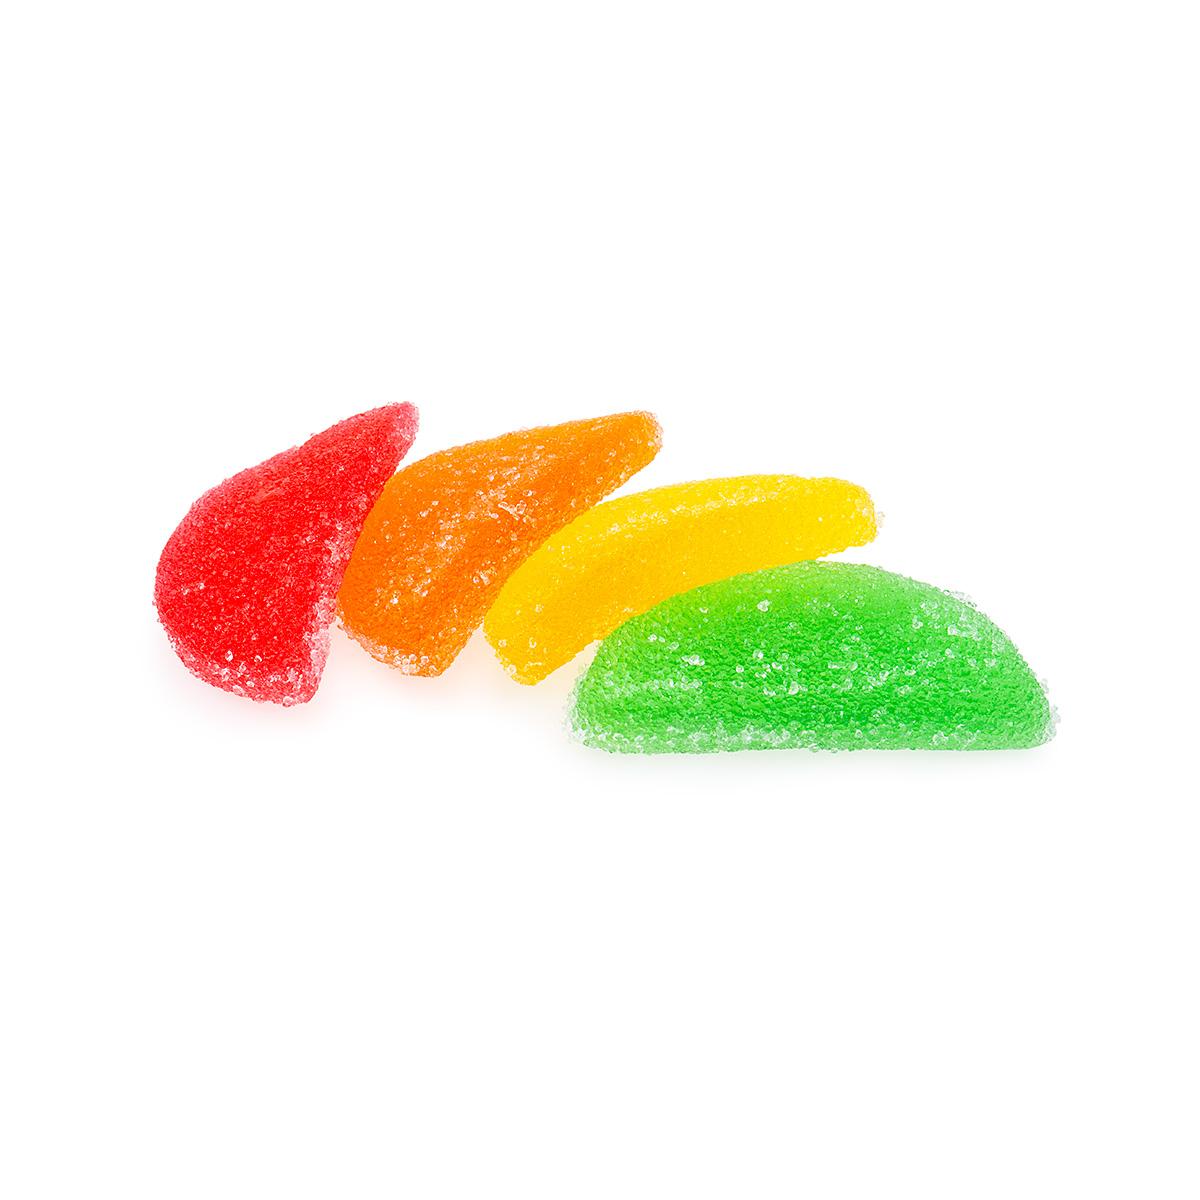 Sugar-Free Wrapped Fruit Slices Candy - 1 lb.